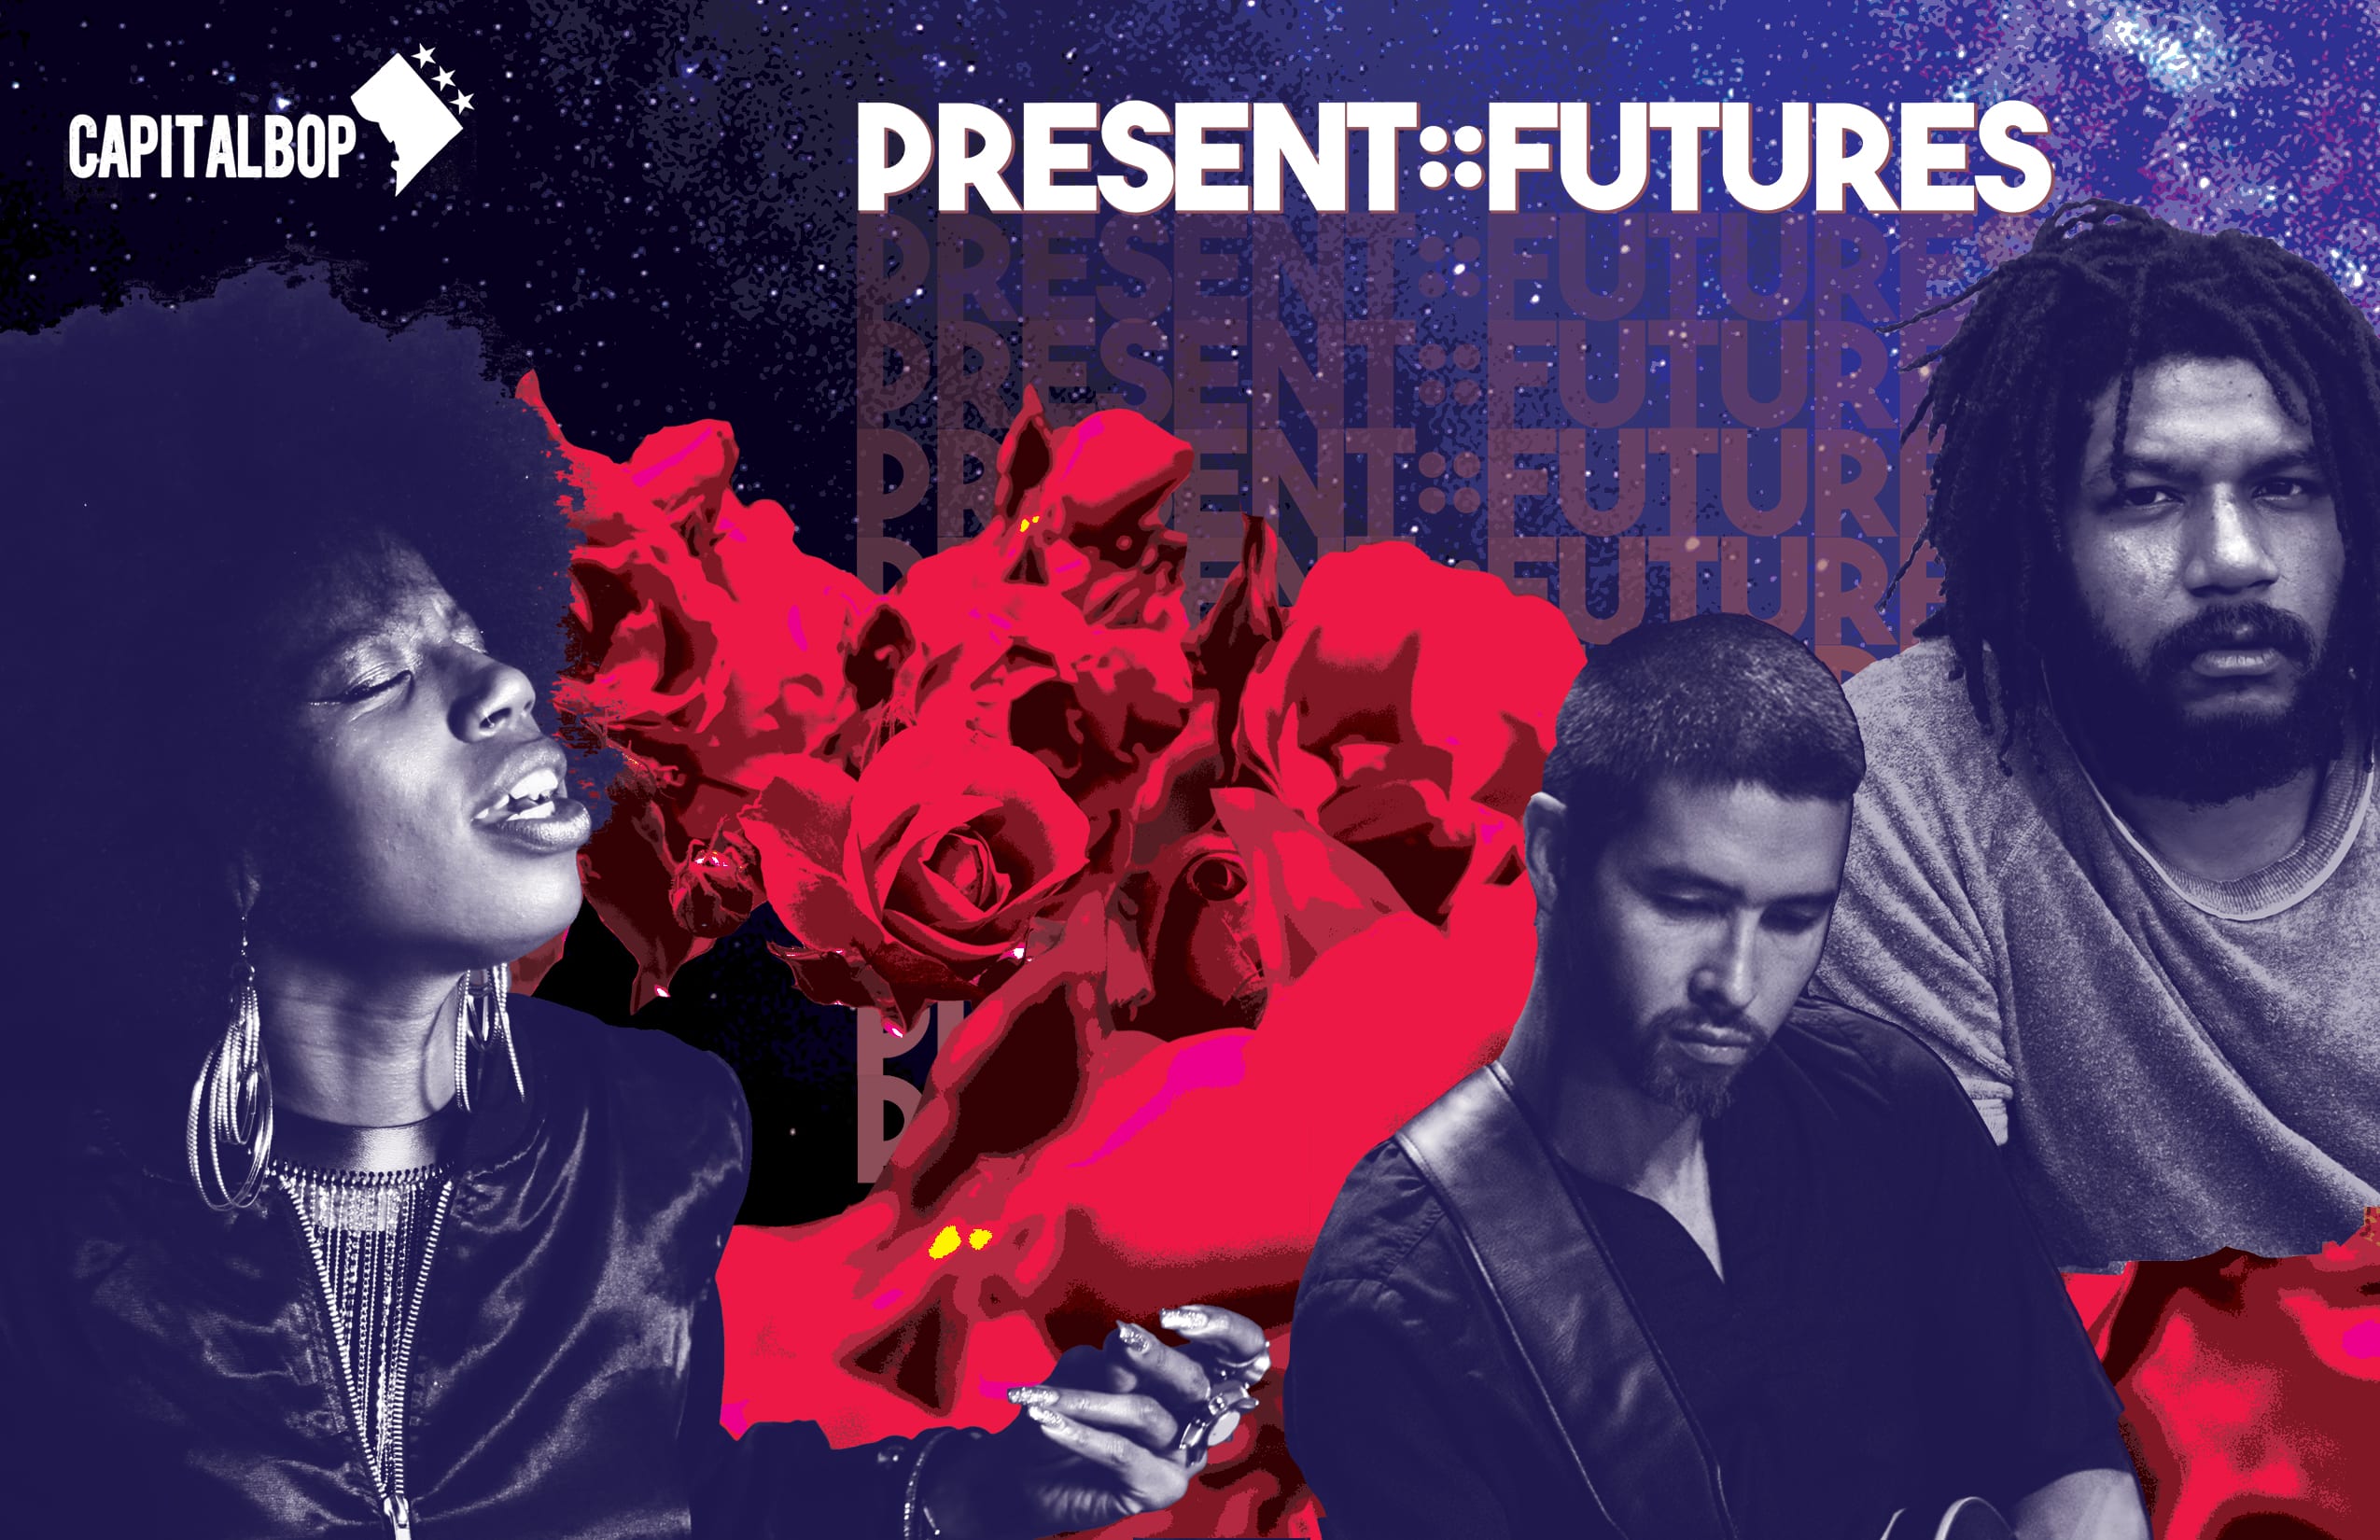 CapitalBop's present::futures at the DC JazzFest celebrates young ...